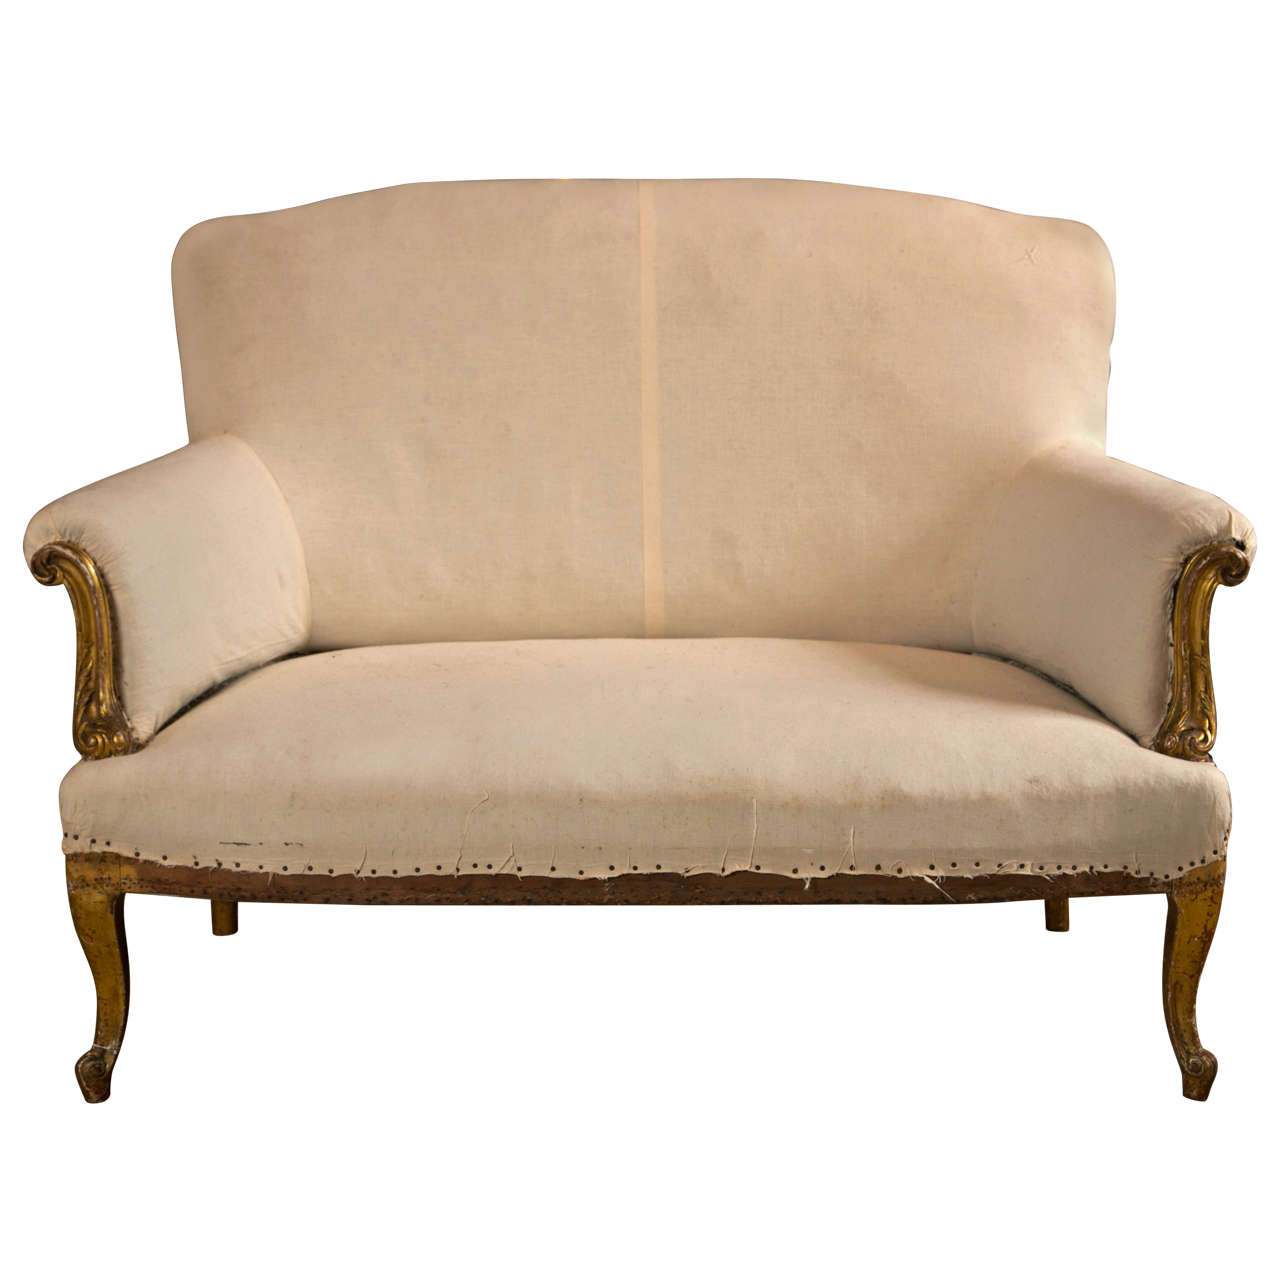 French Carved Giltwood Sofa with Scroll Arms and Cabriole Legs